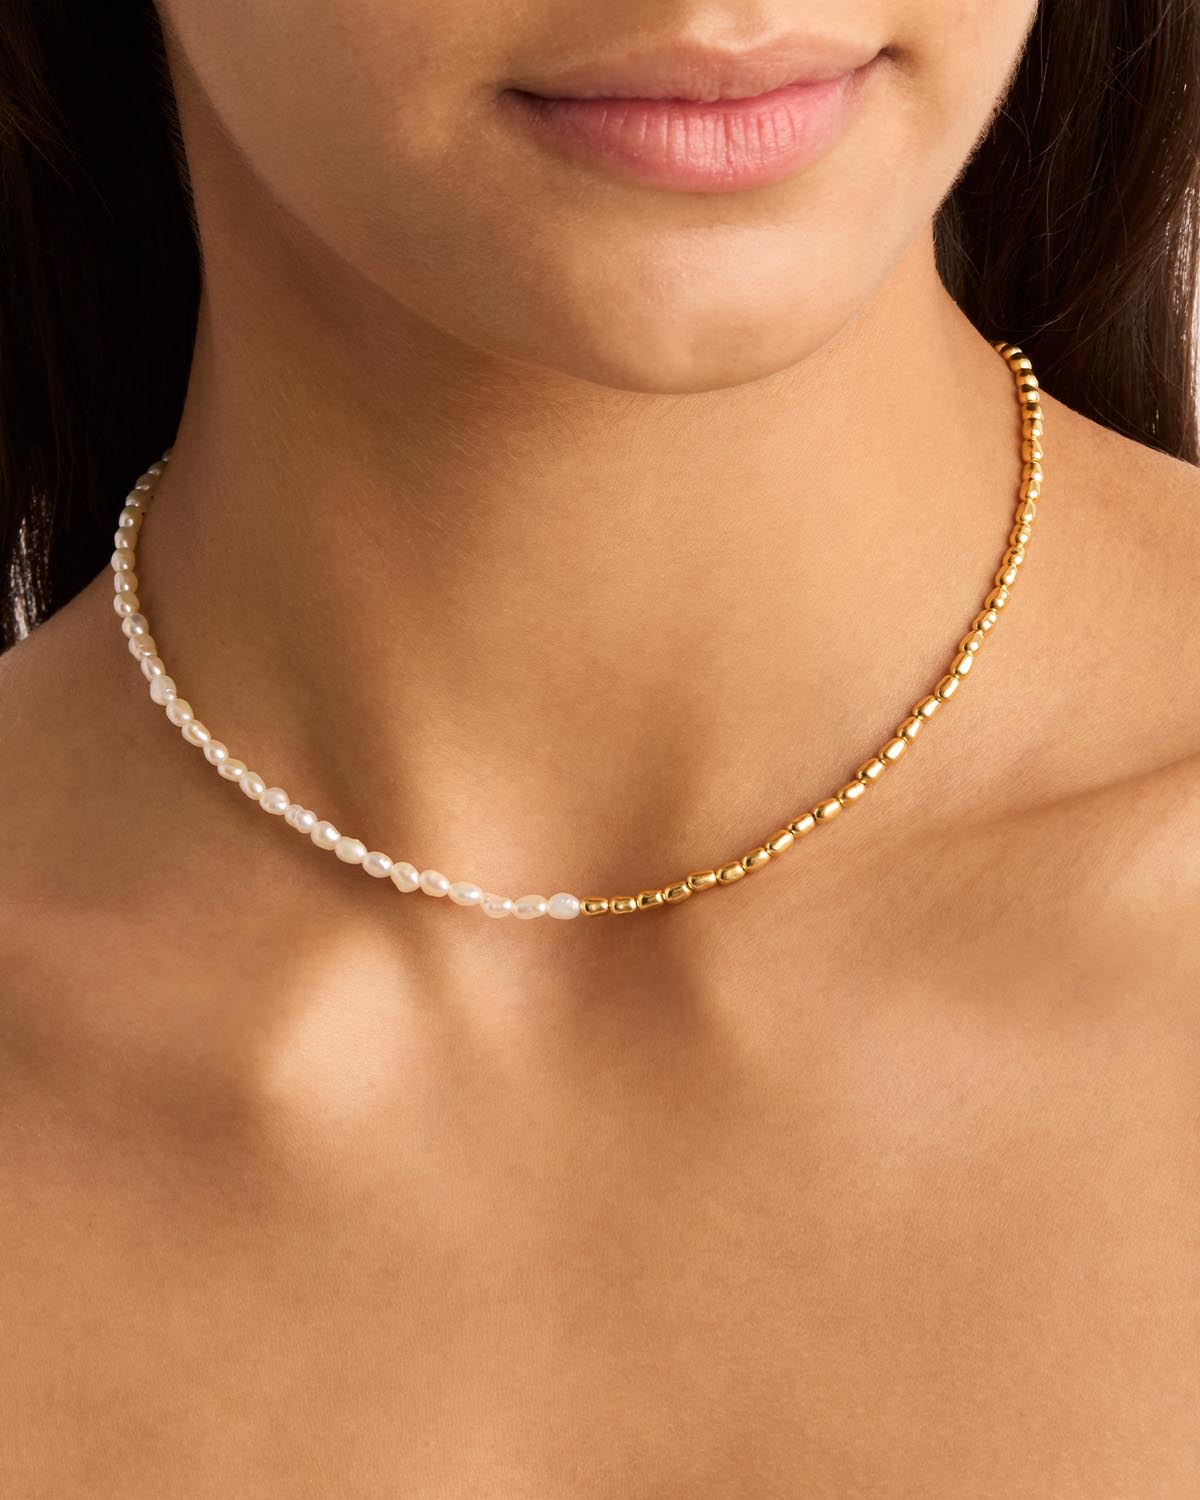 Everleigh Gold Chain Necklace in White Pearl | Kendra Scott